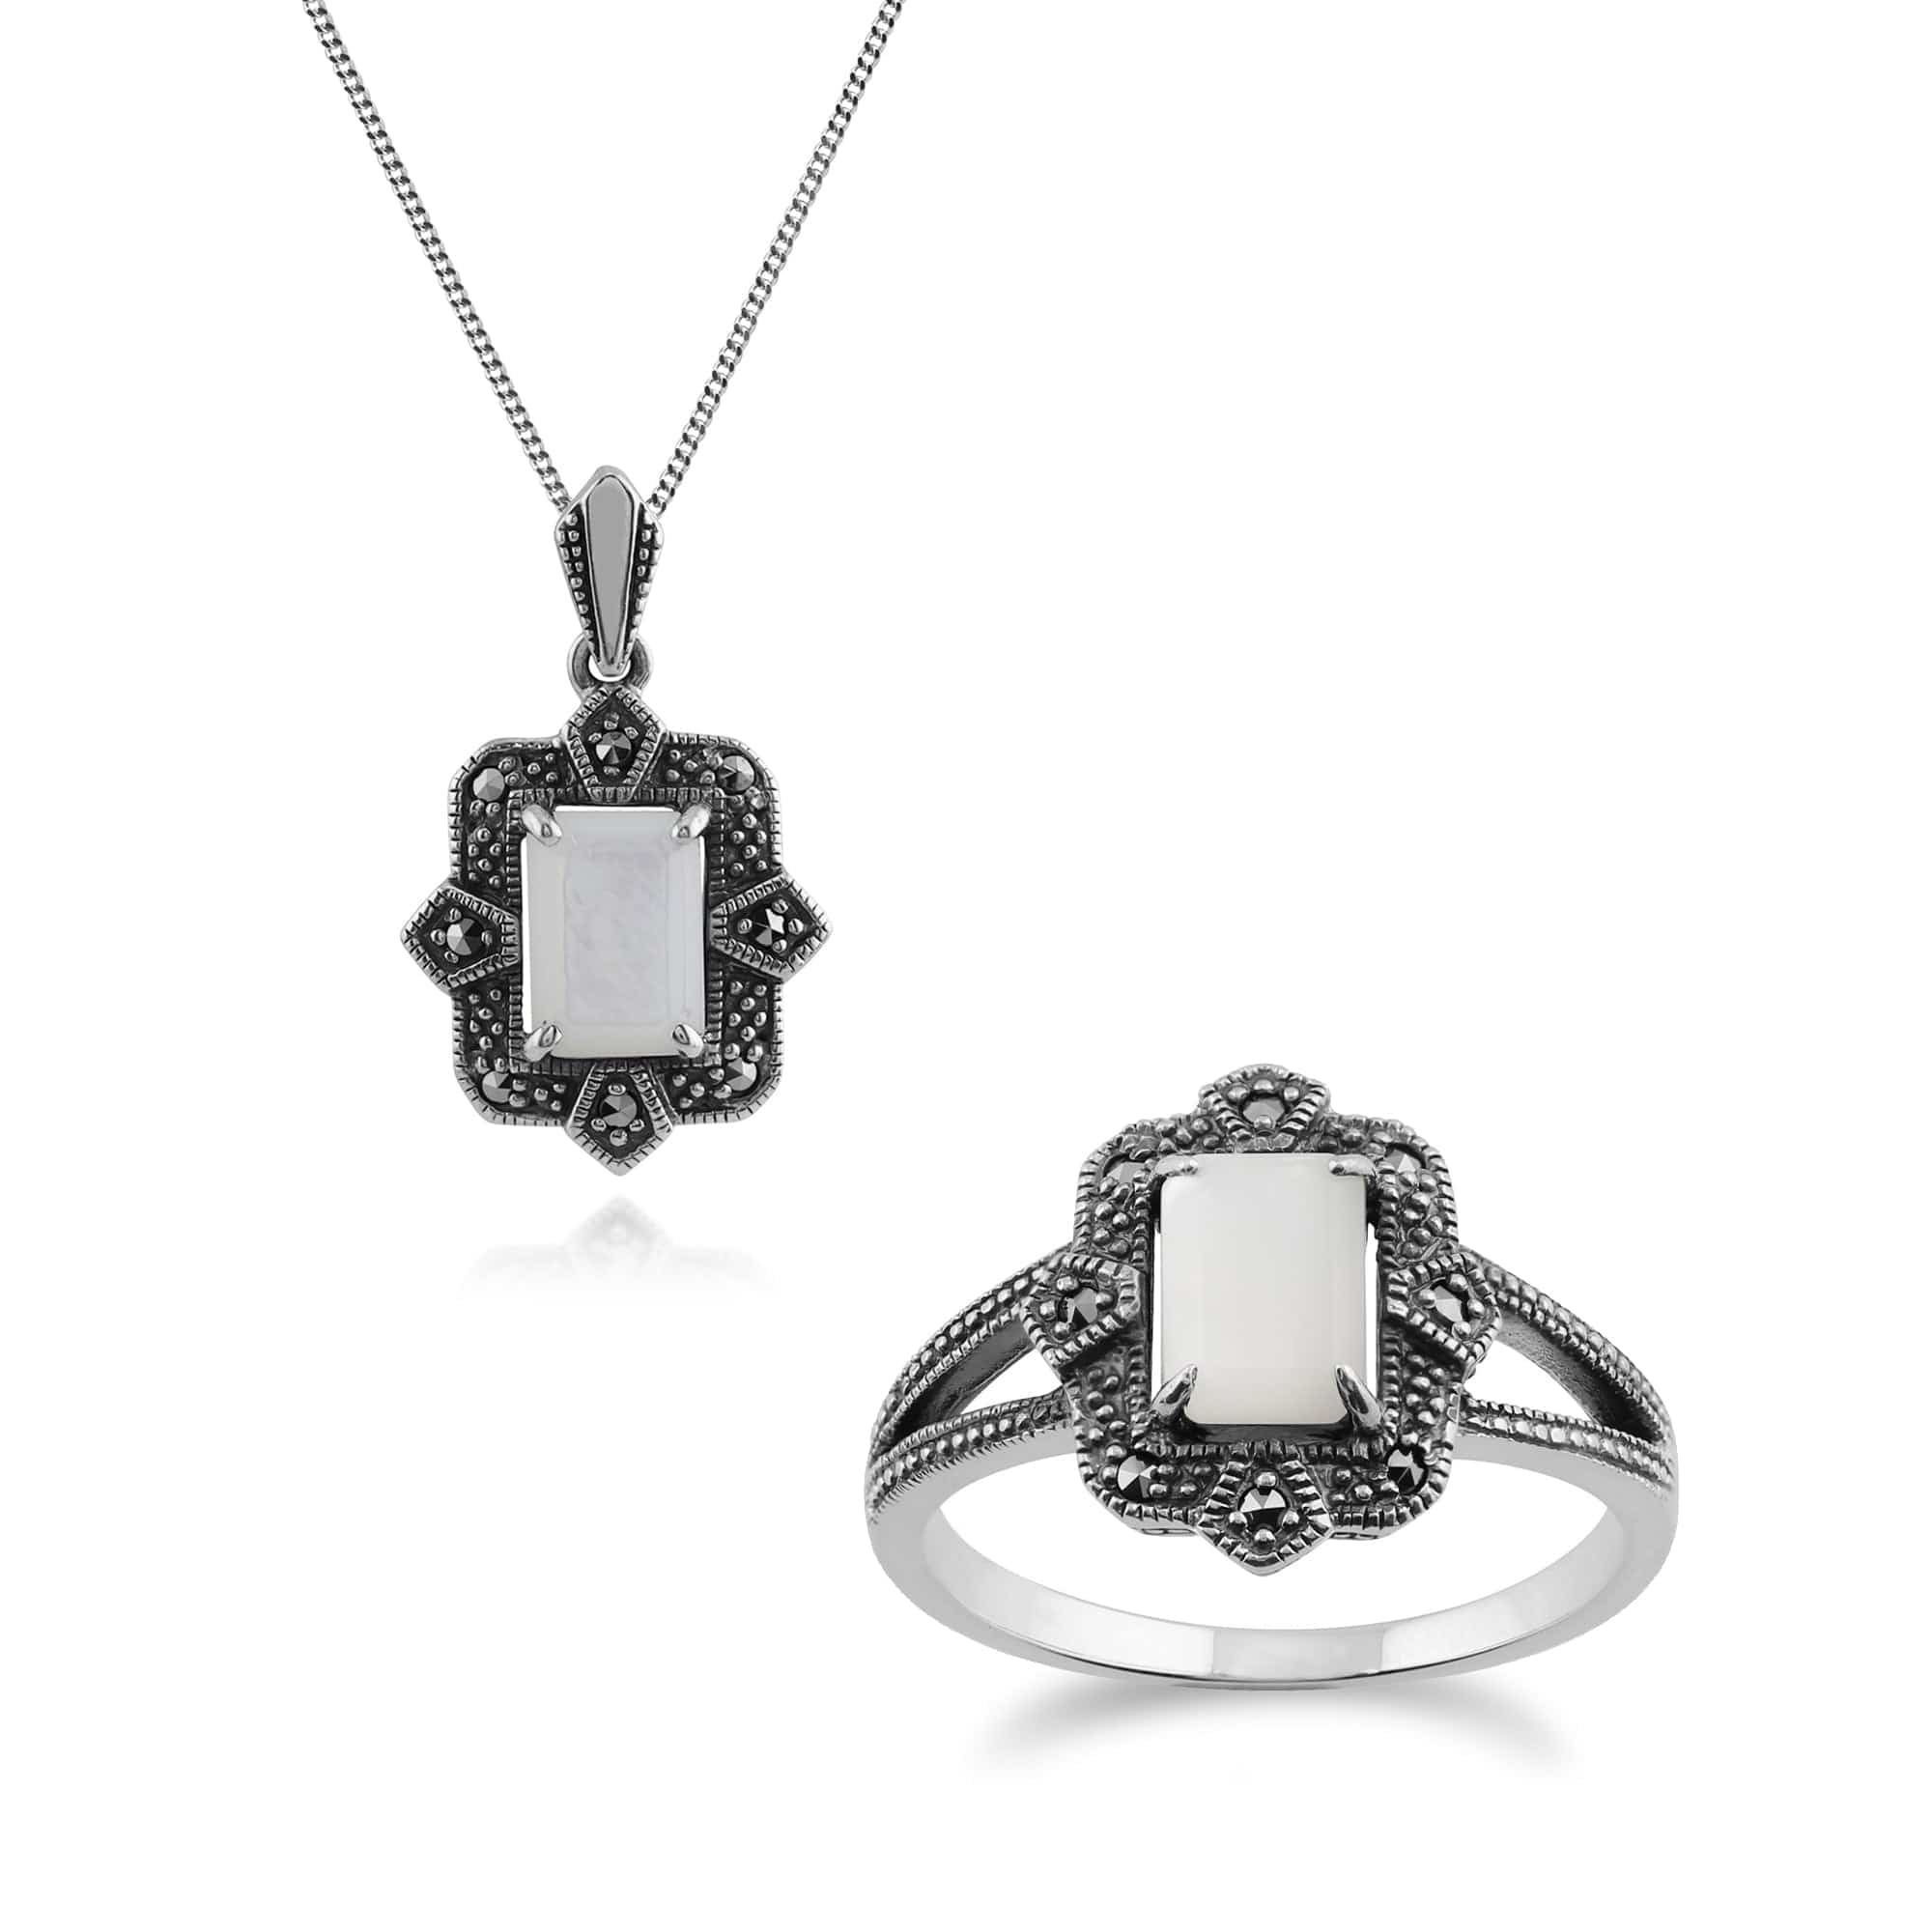 214P297802925-214R479004925 Art Deco Style Baguette Mother of Pearl & Marcasite Framed Pendant & Ring Set in 925 Sterling Silver 1